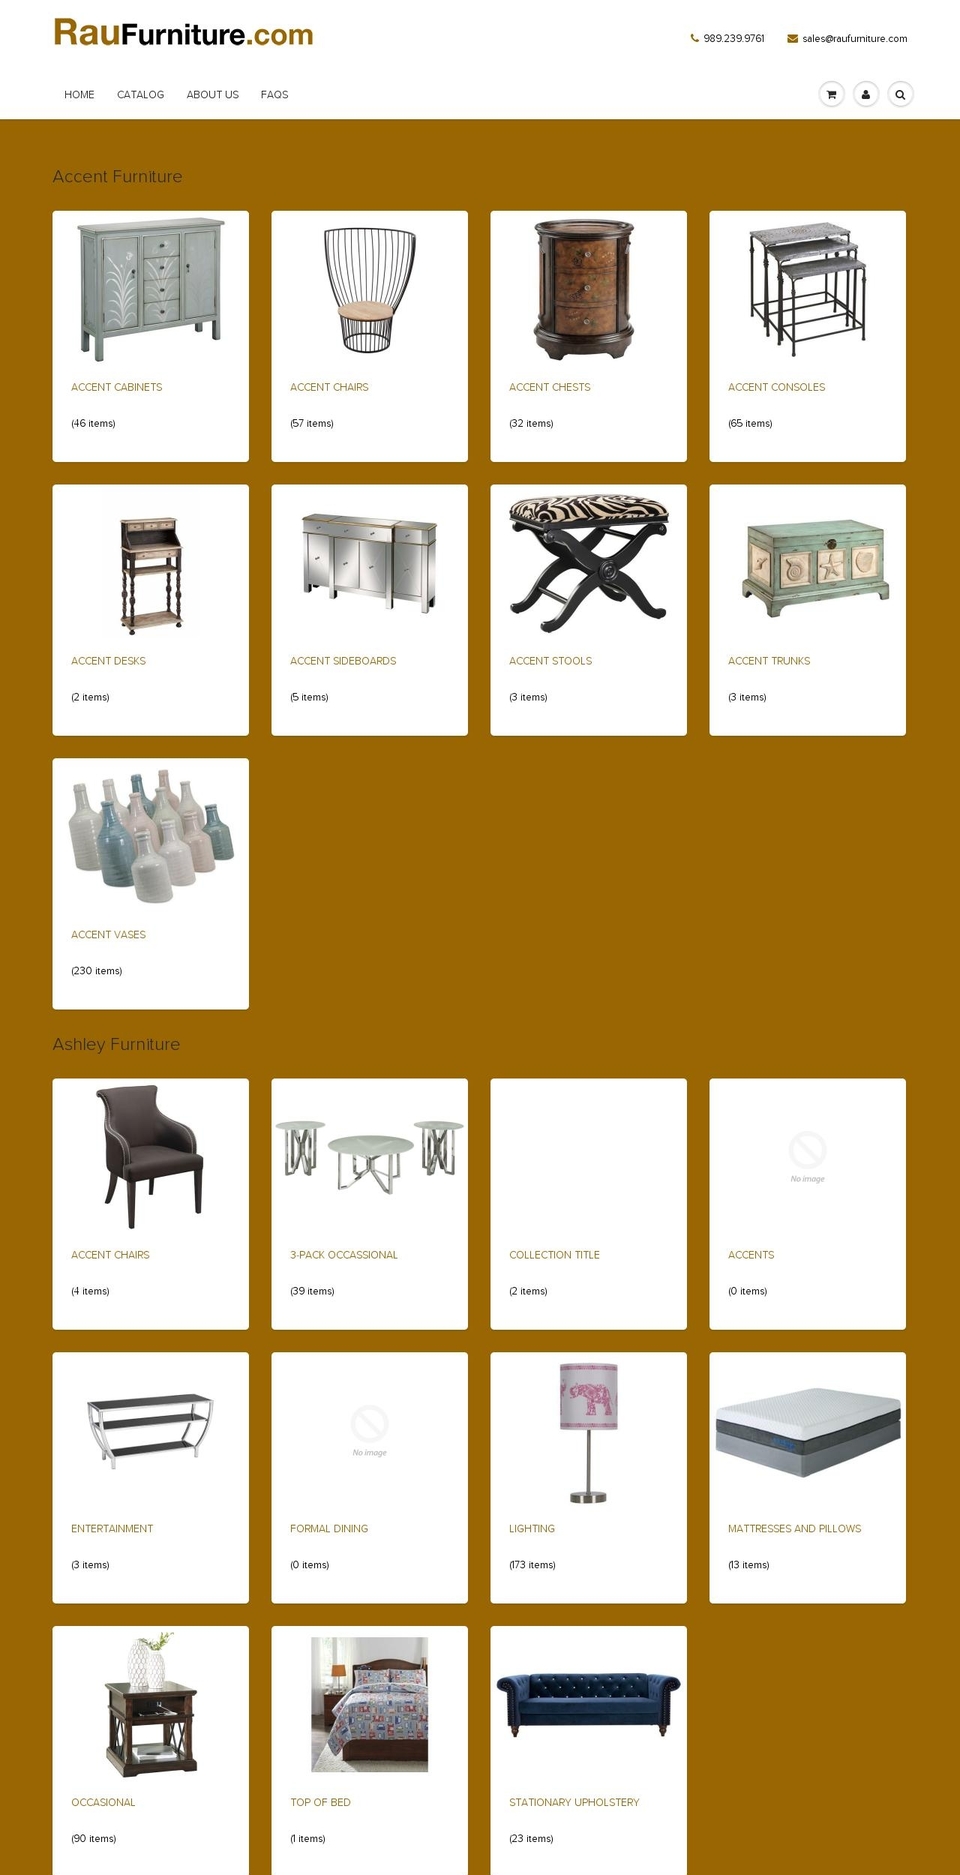 furniture Shopify theme site example raufurniture.com